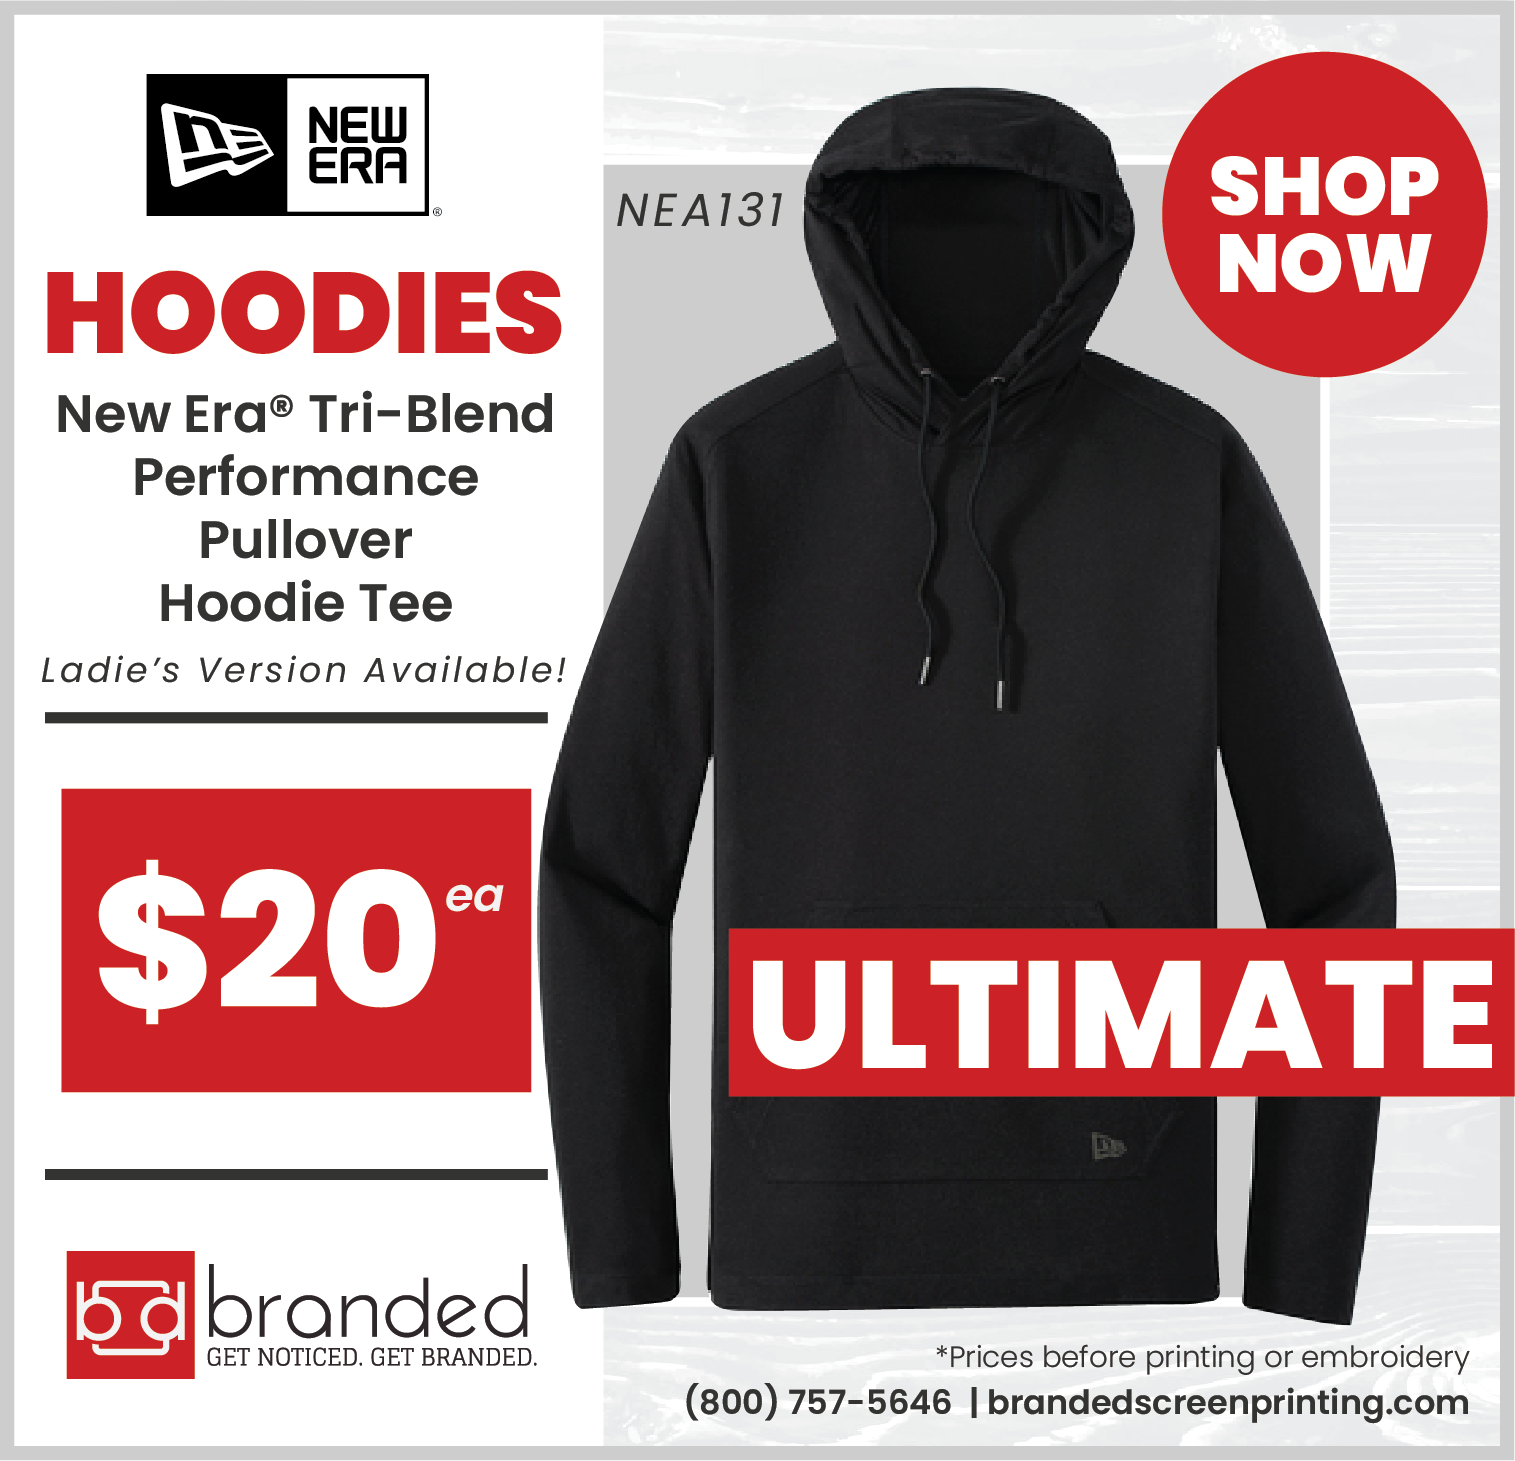 Branded has customizable hooded long sleeves from Ulimate at a great price custom screen printing